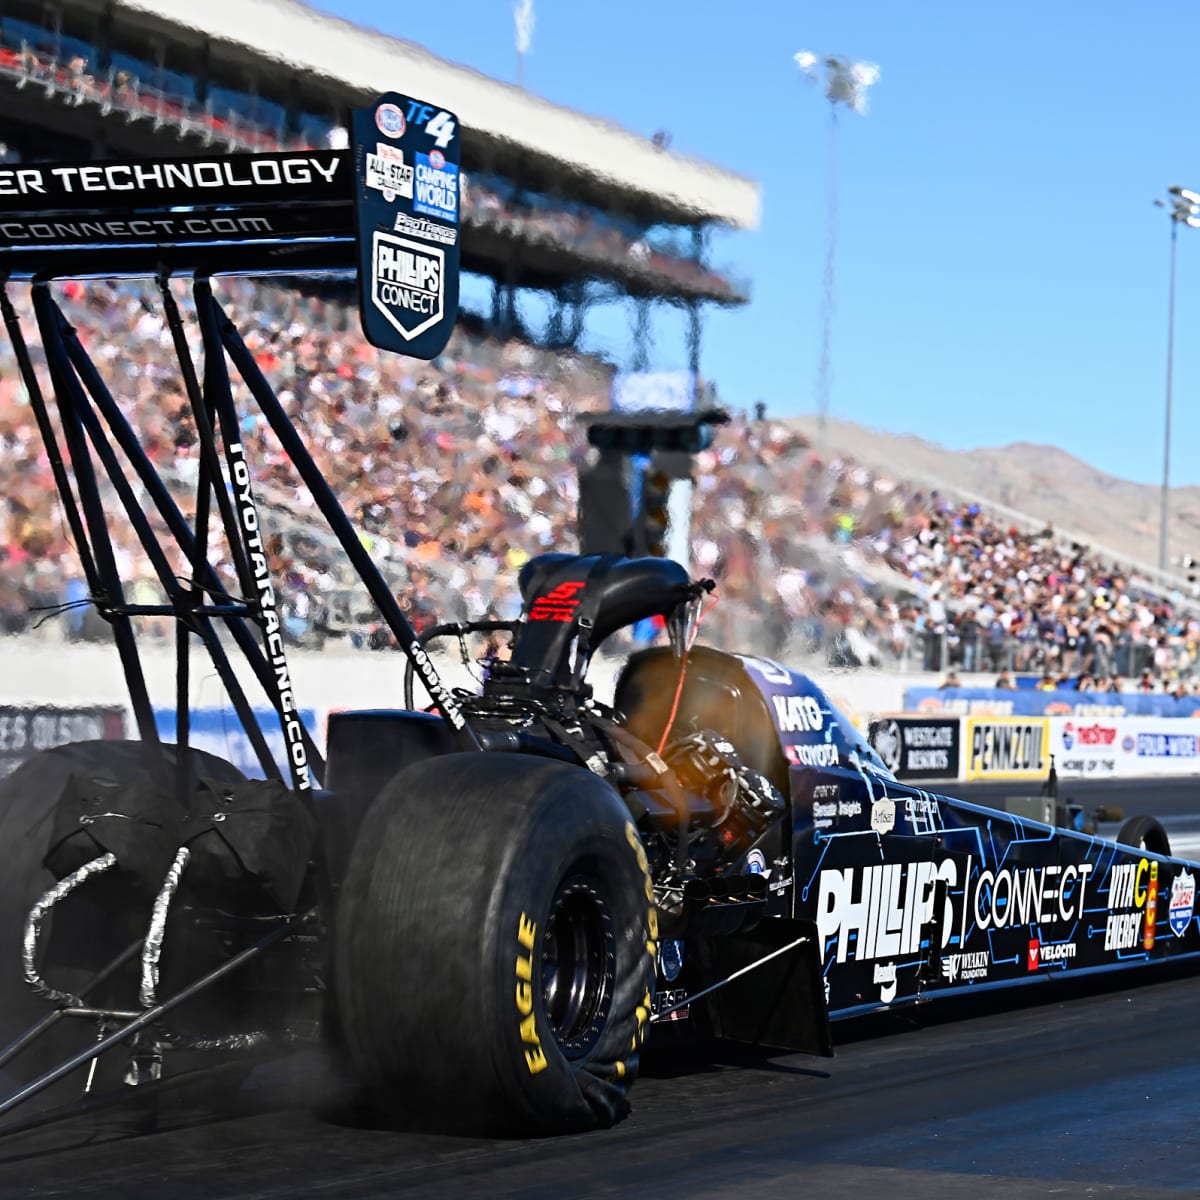 Top Fuel Within Grasp of Justin Ashley - Auto Racing Digest